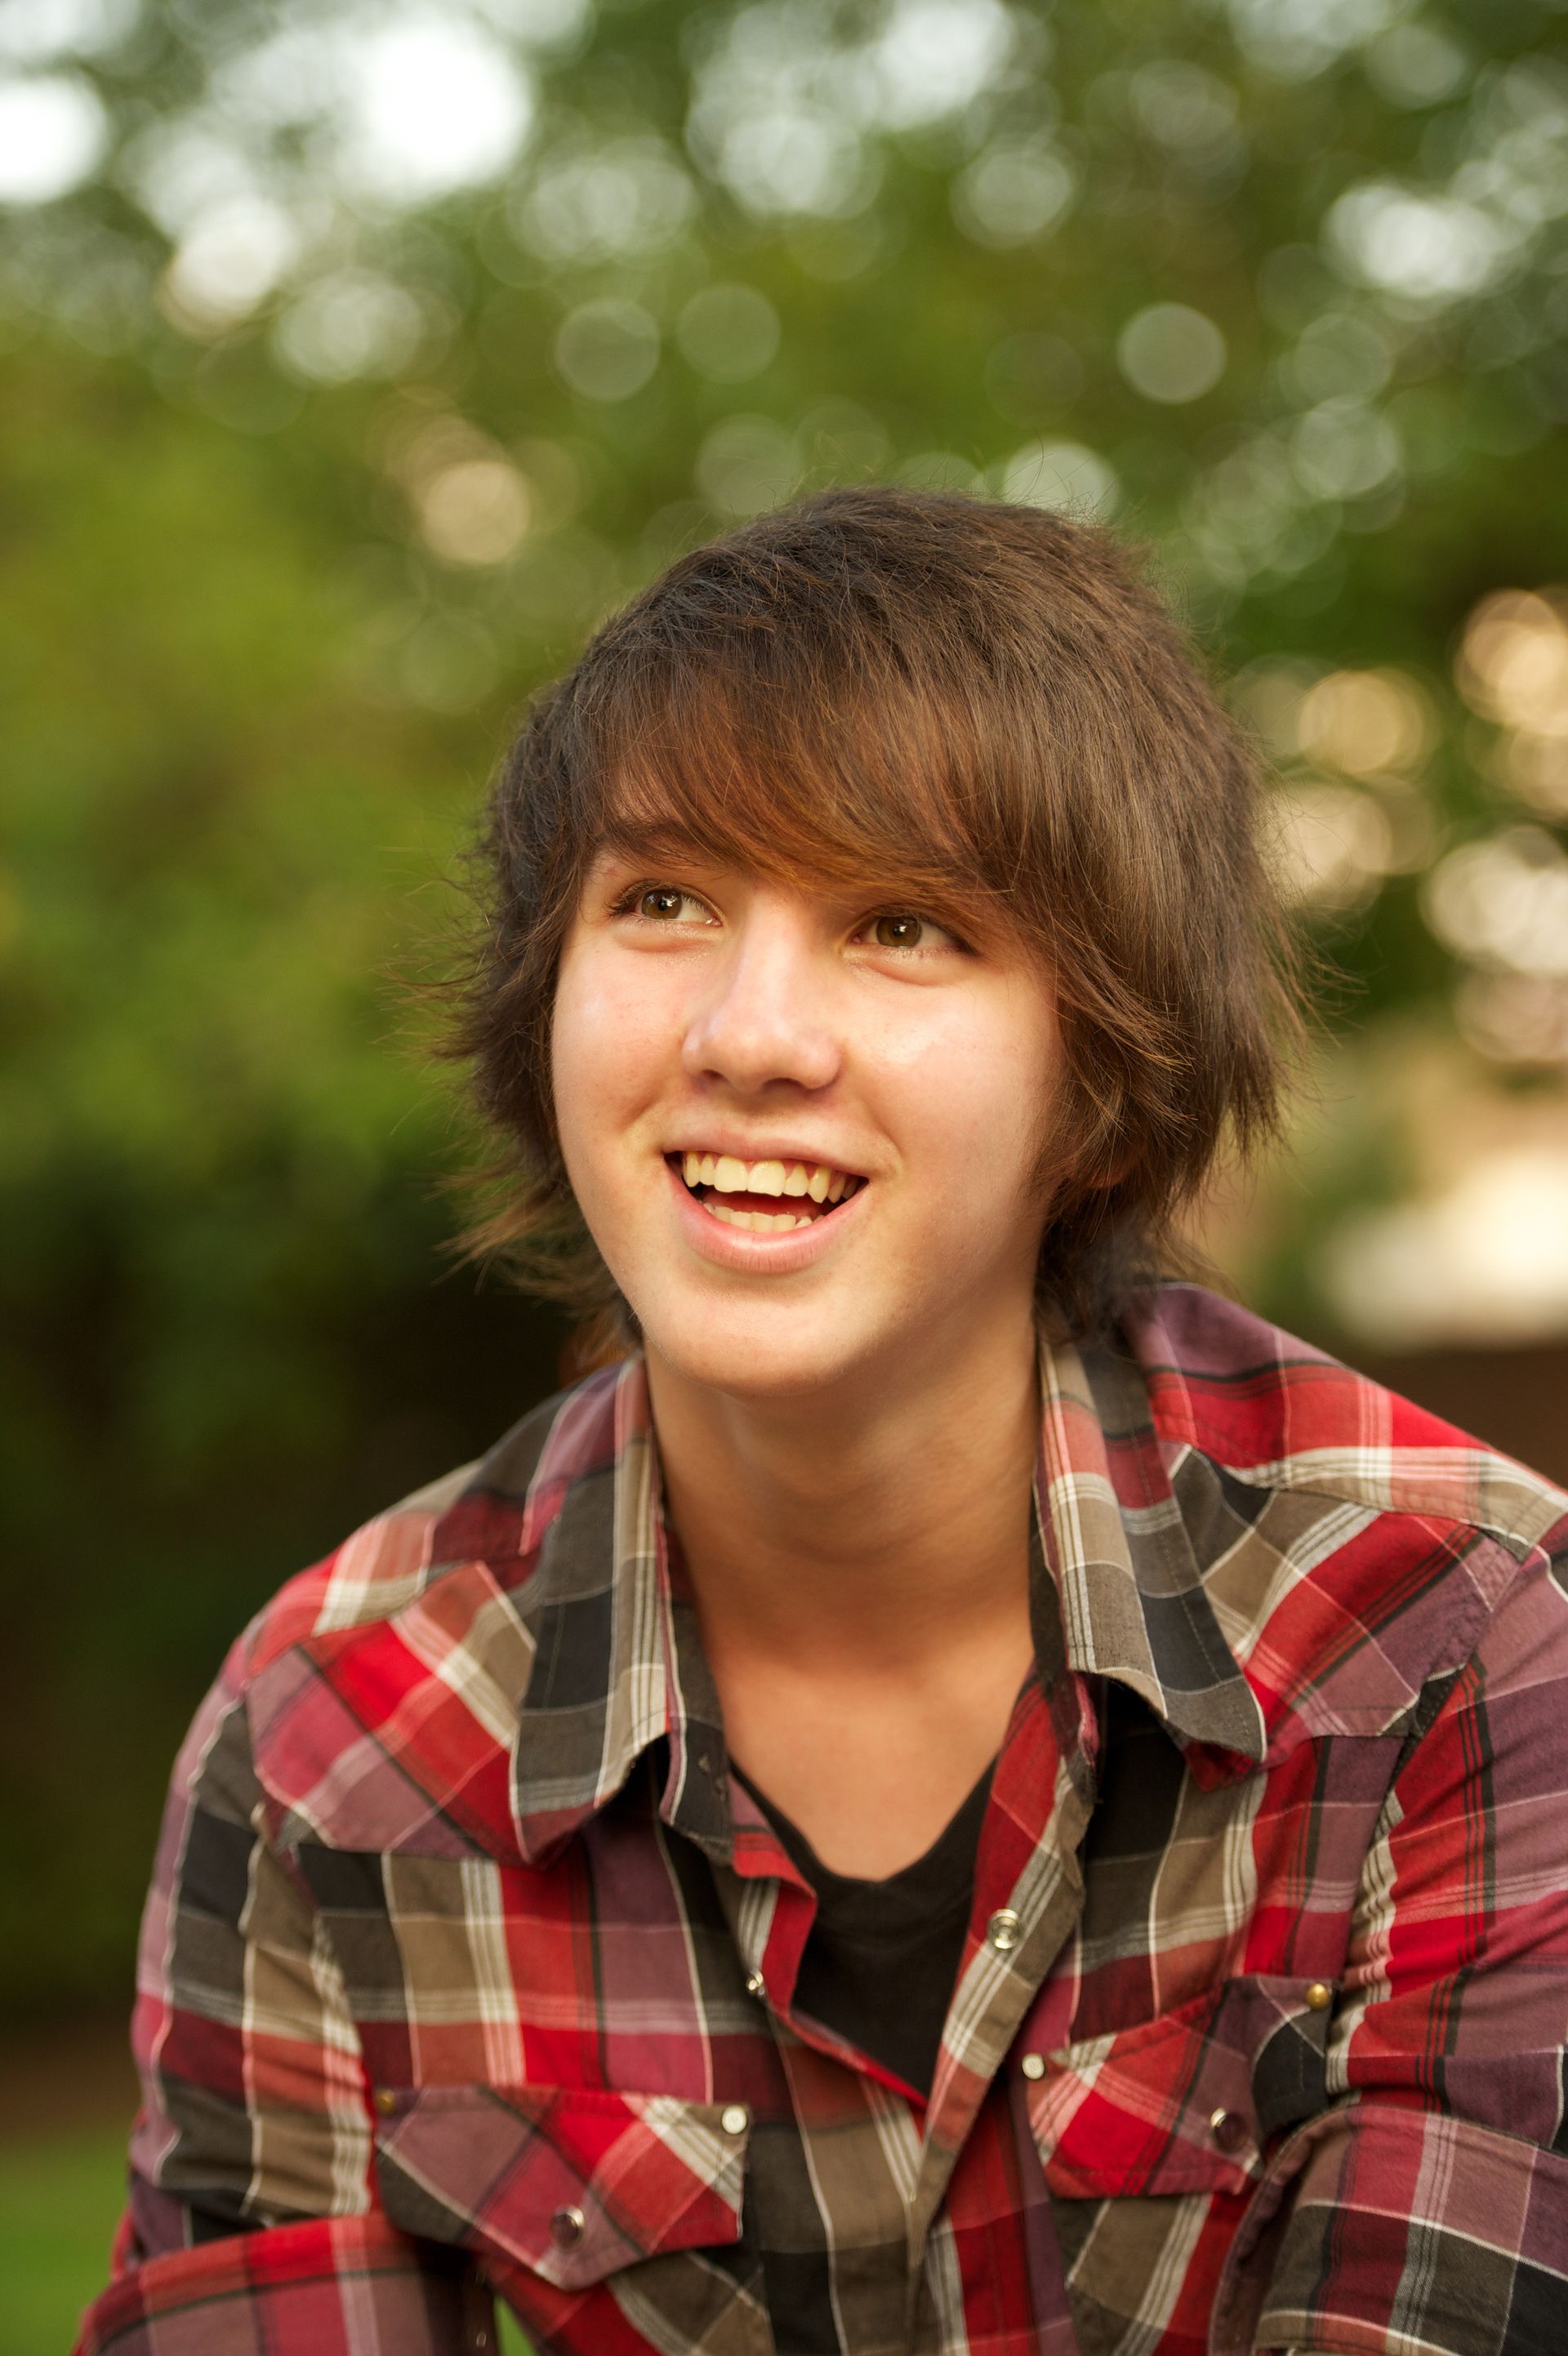 A portrait of a young man with somewhat long hair and a plaid shirt, looking up and smiling.